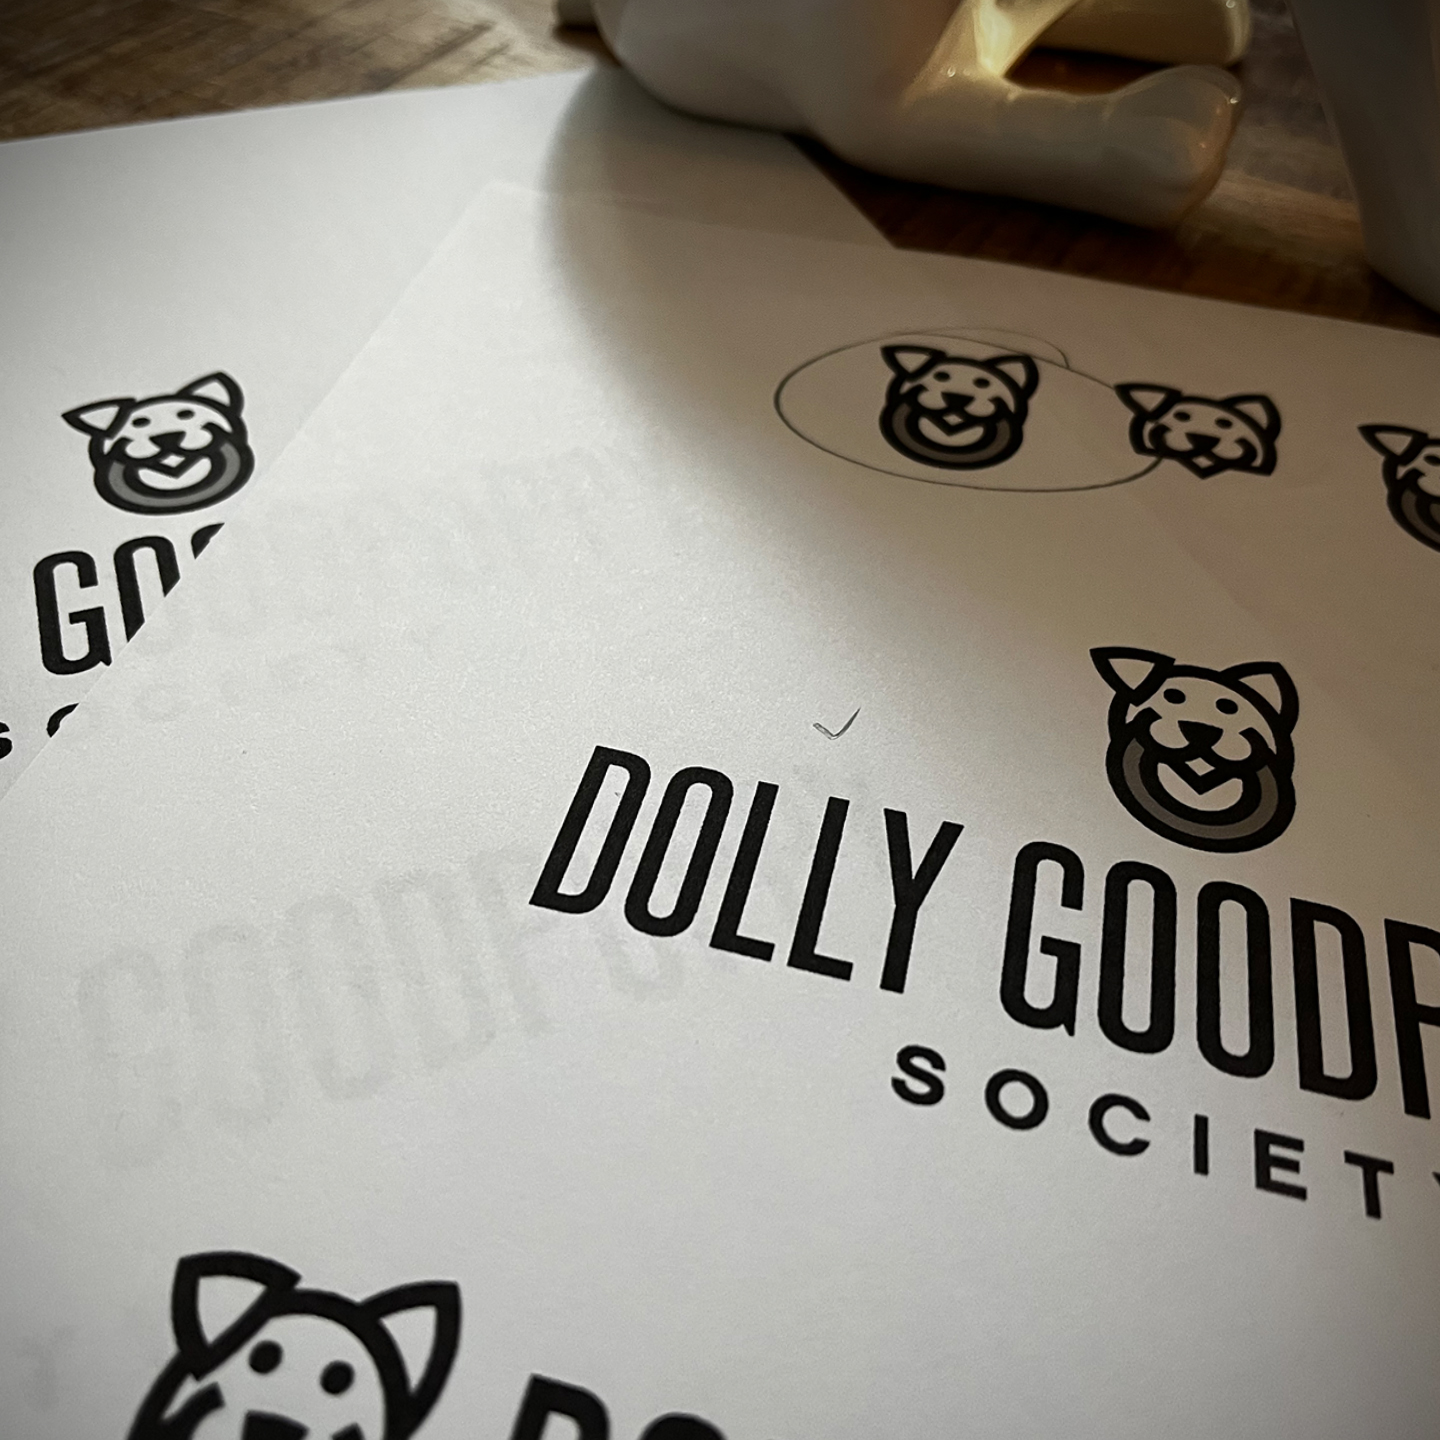 Dolly Goodpuppy Concepts